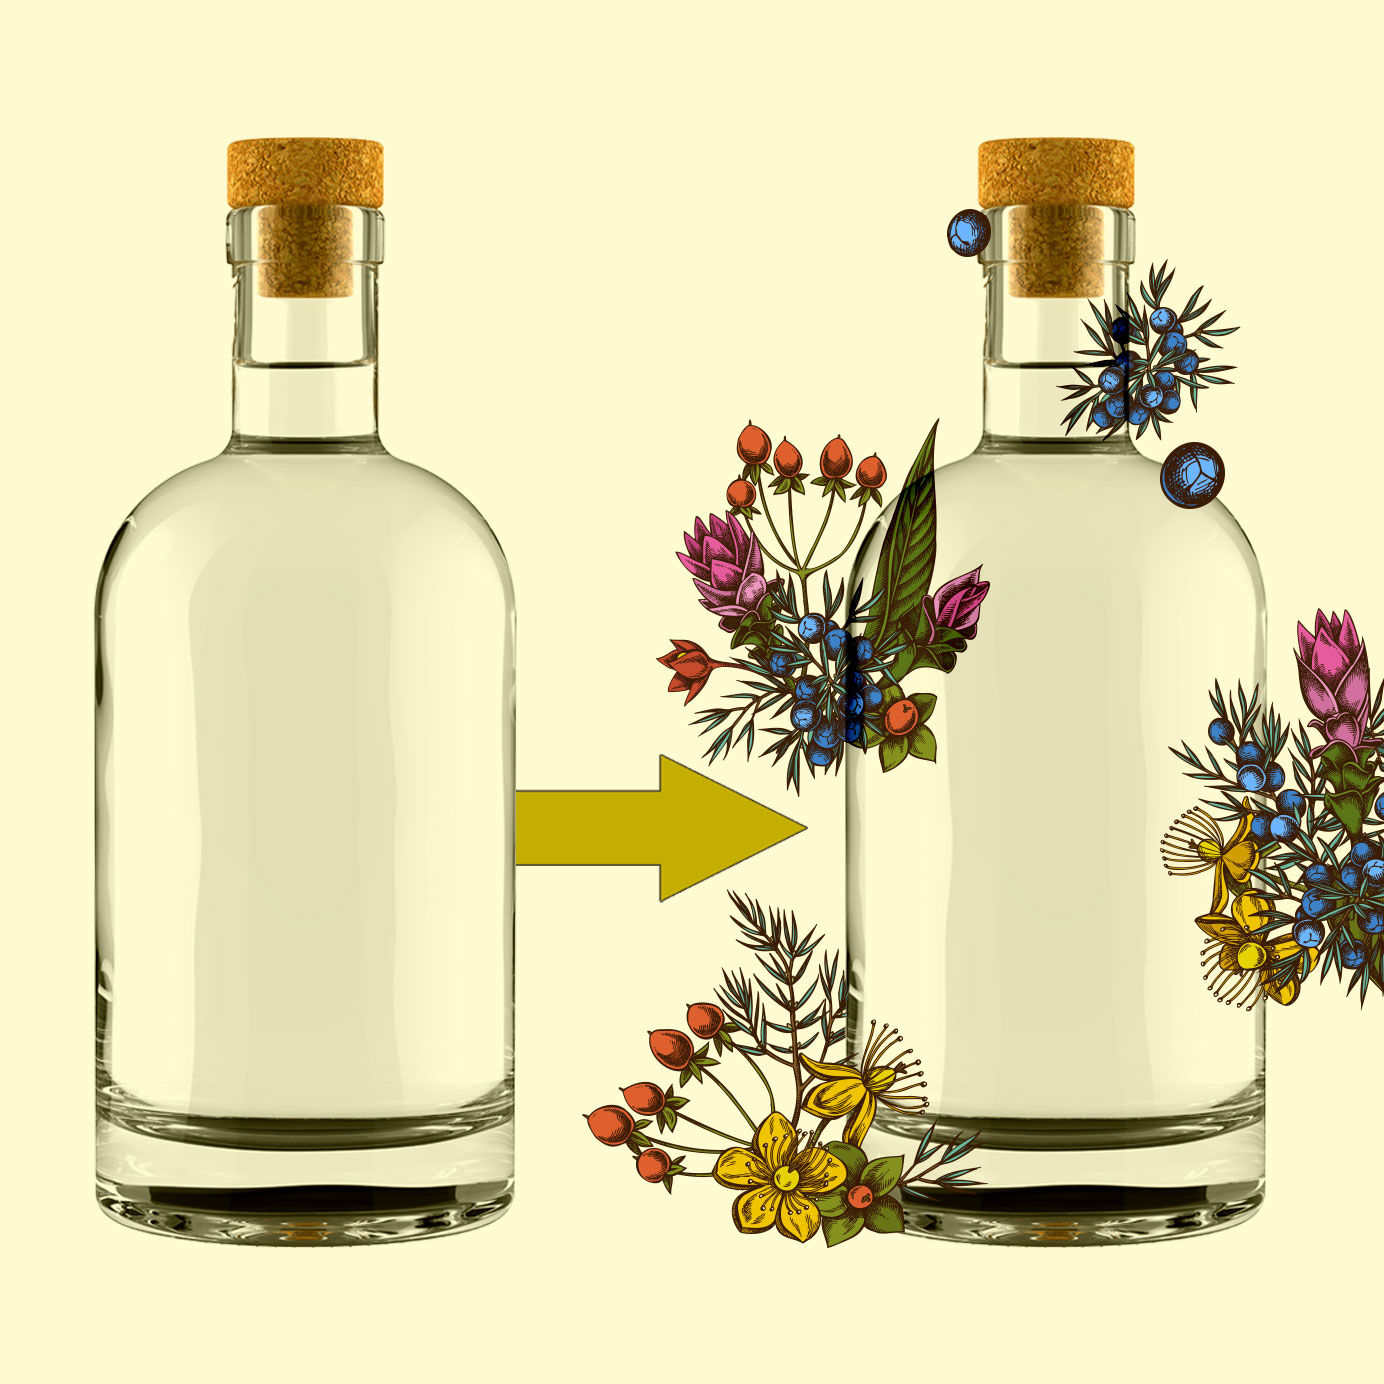 Does It Matter That Most Gin Brands Don’t Make Their Own Base Alcohol?